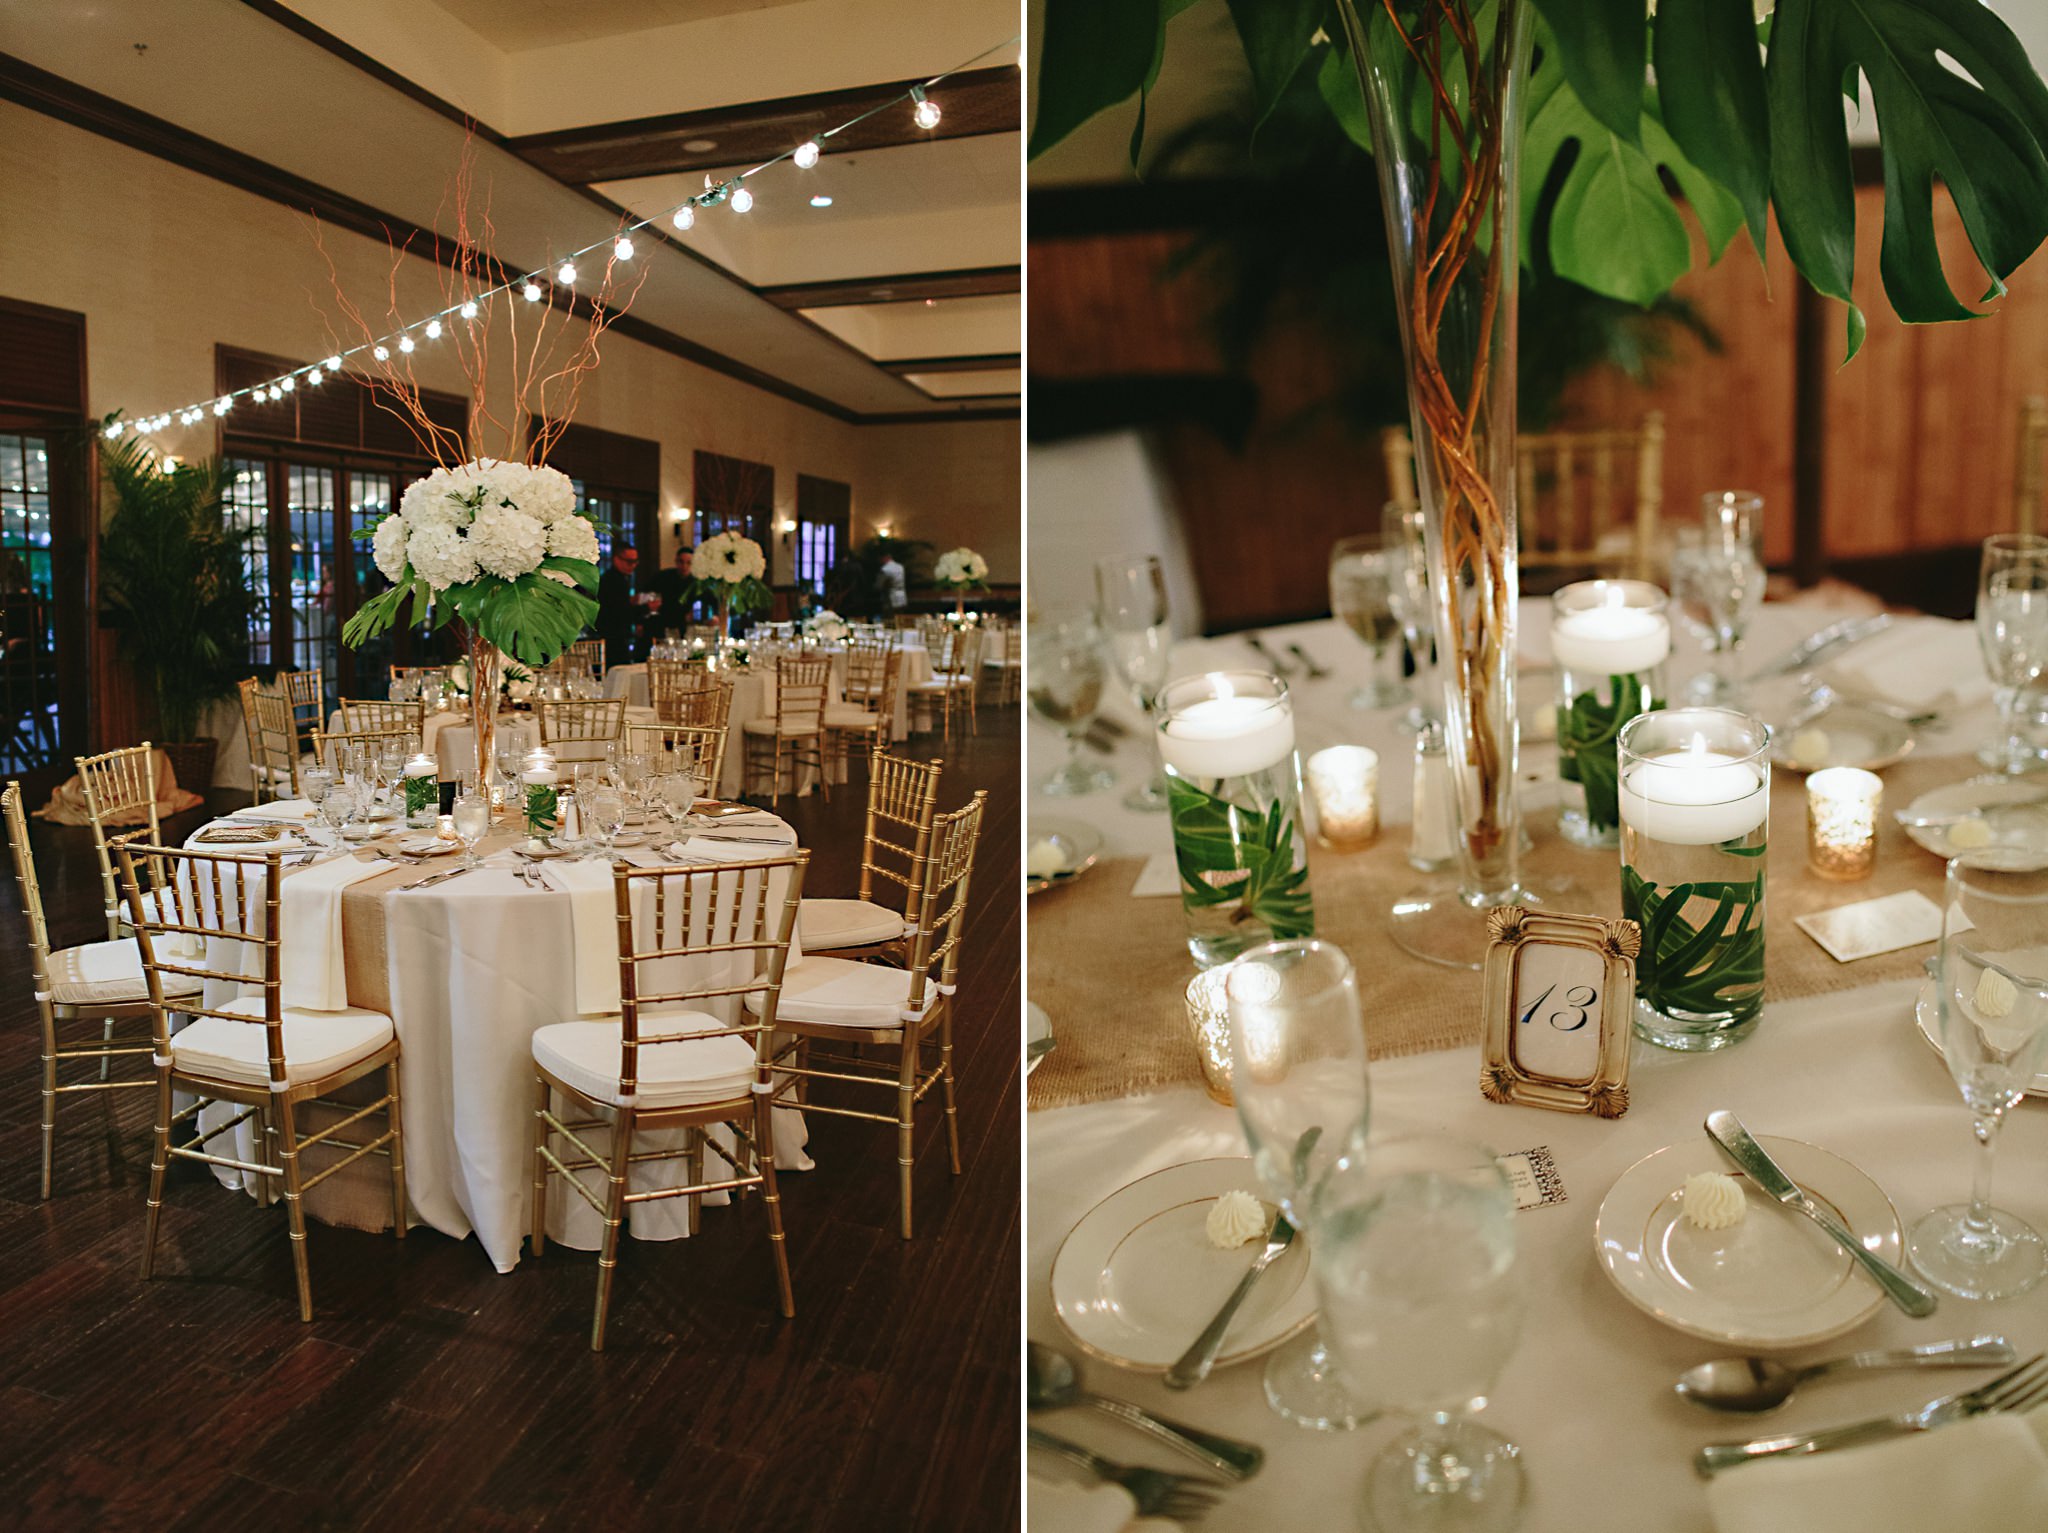 Wedding reception with tall vase hydrangeas and curly willow